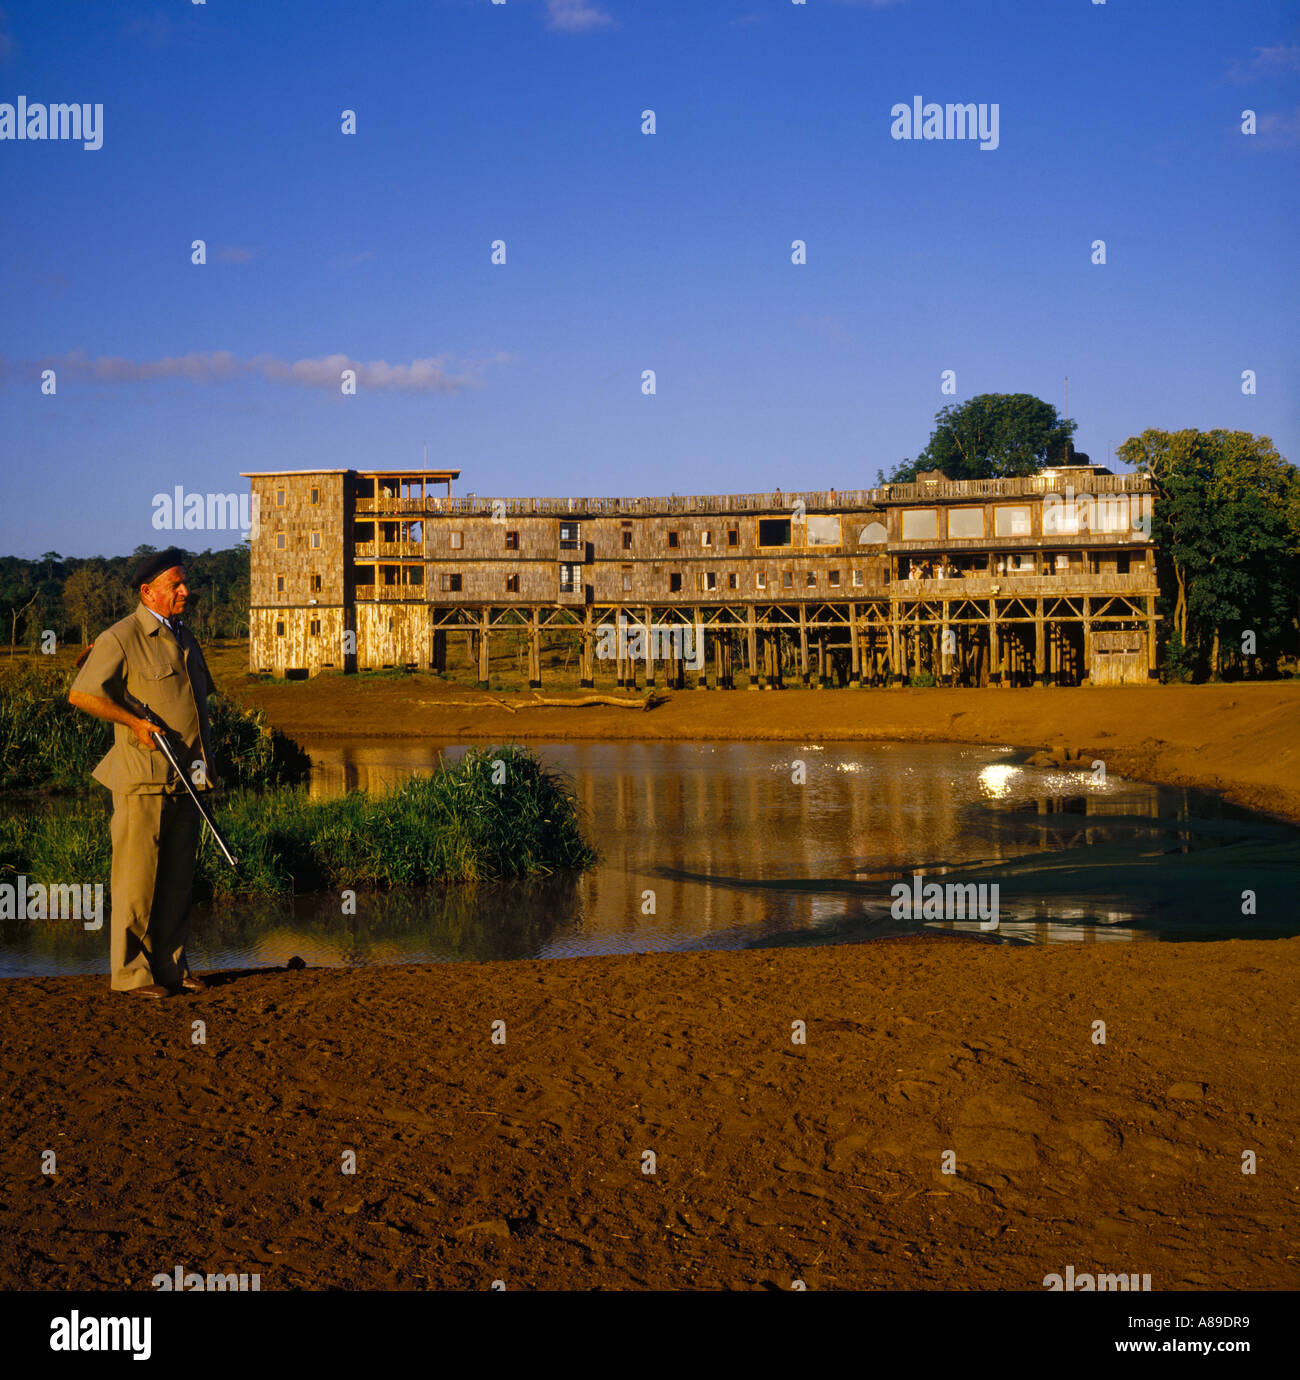 A local warden with rifle standing by the animals waterhole at the famous Treetops safari lodge in Kenya East Africa Stock Photo